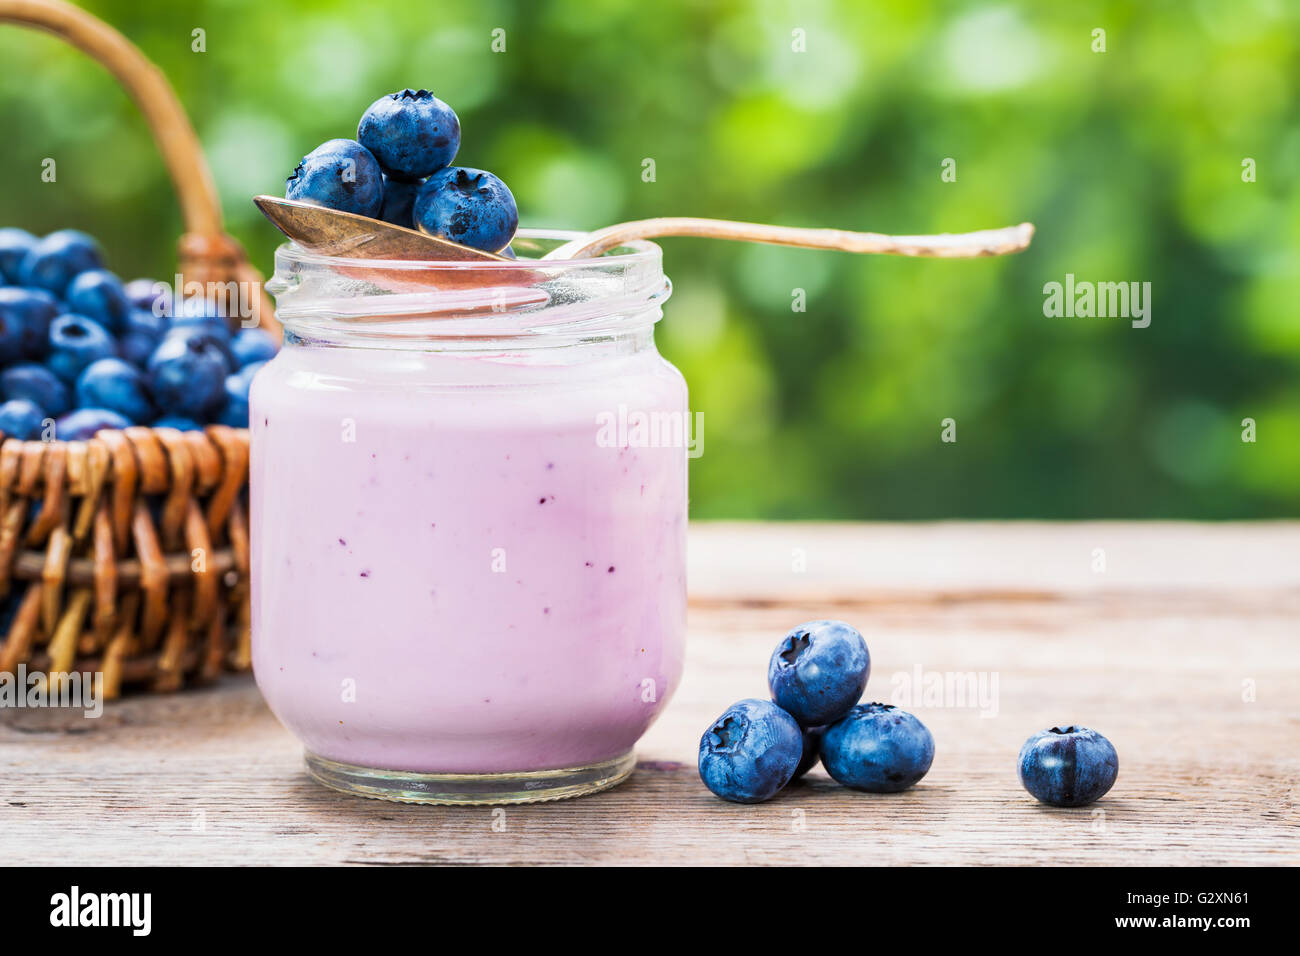 Blueberries yogurt in jar, basket of berries and saucer with bilberries on table outdoors. Stock Photo